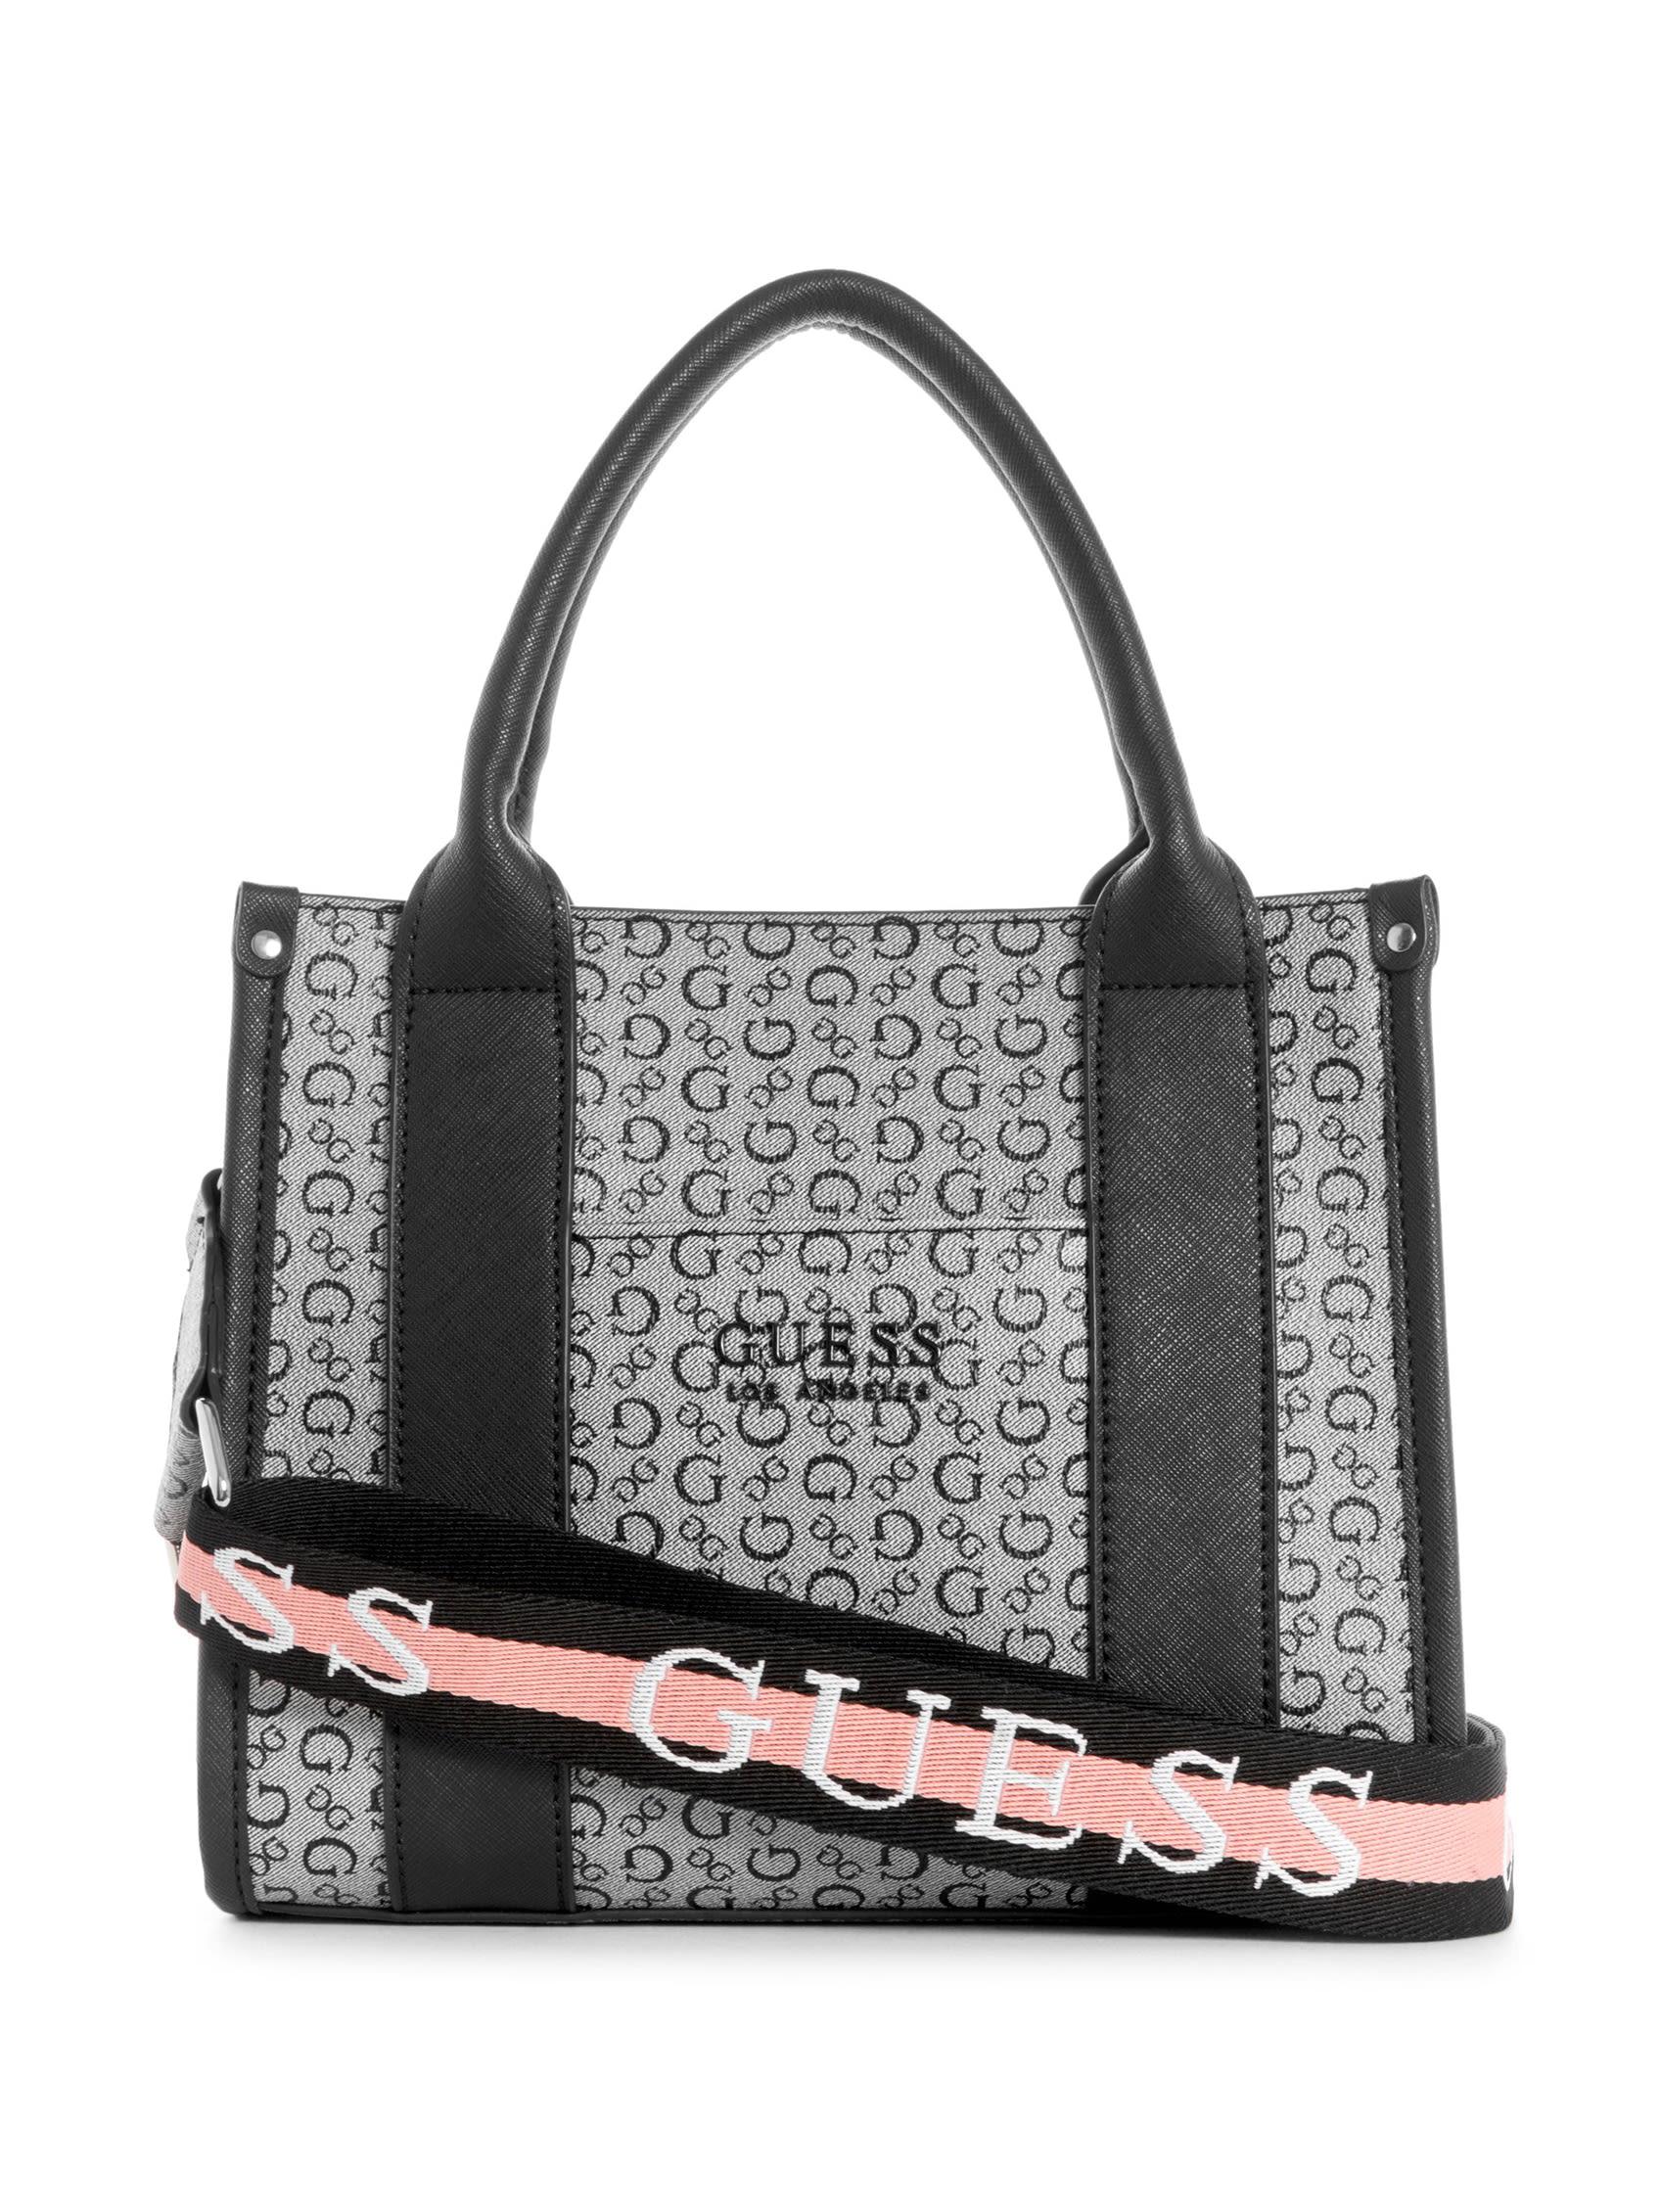 Guess Factory Esme Logo Small Satchel in Black | Lyst